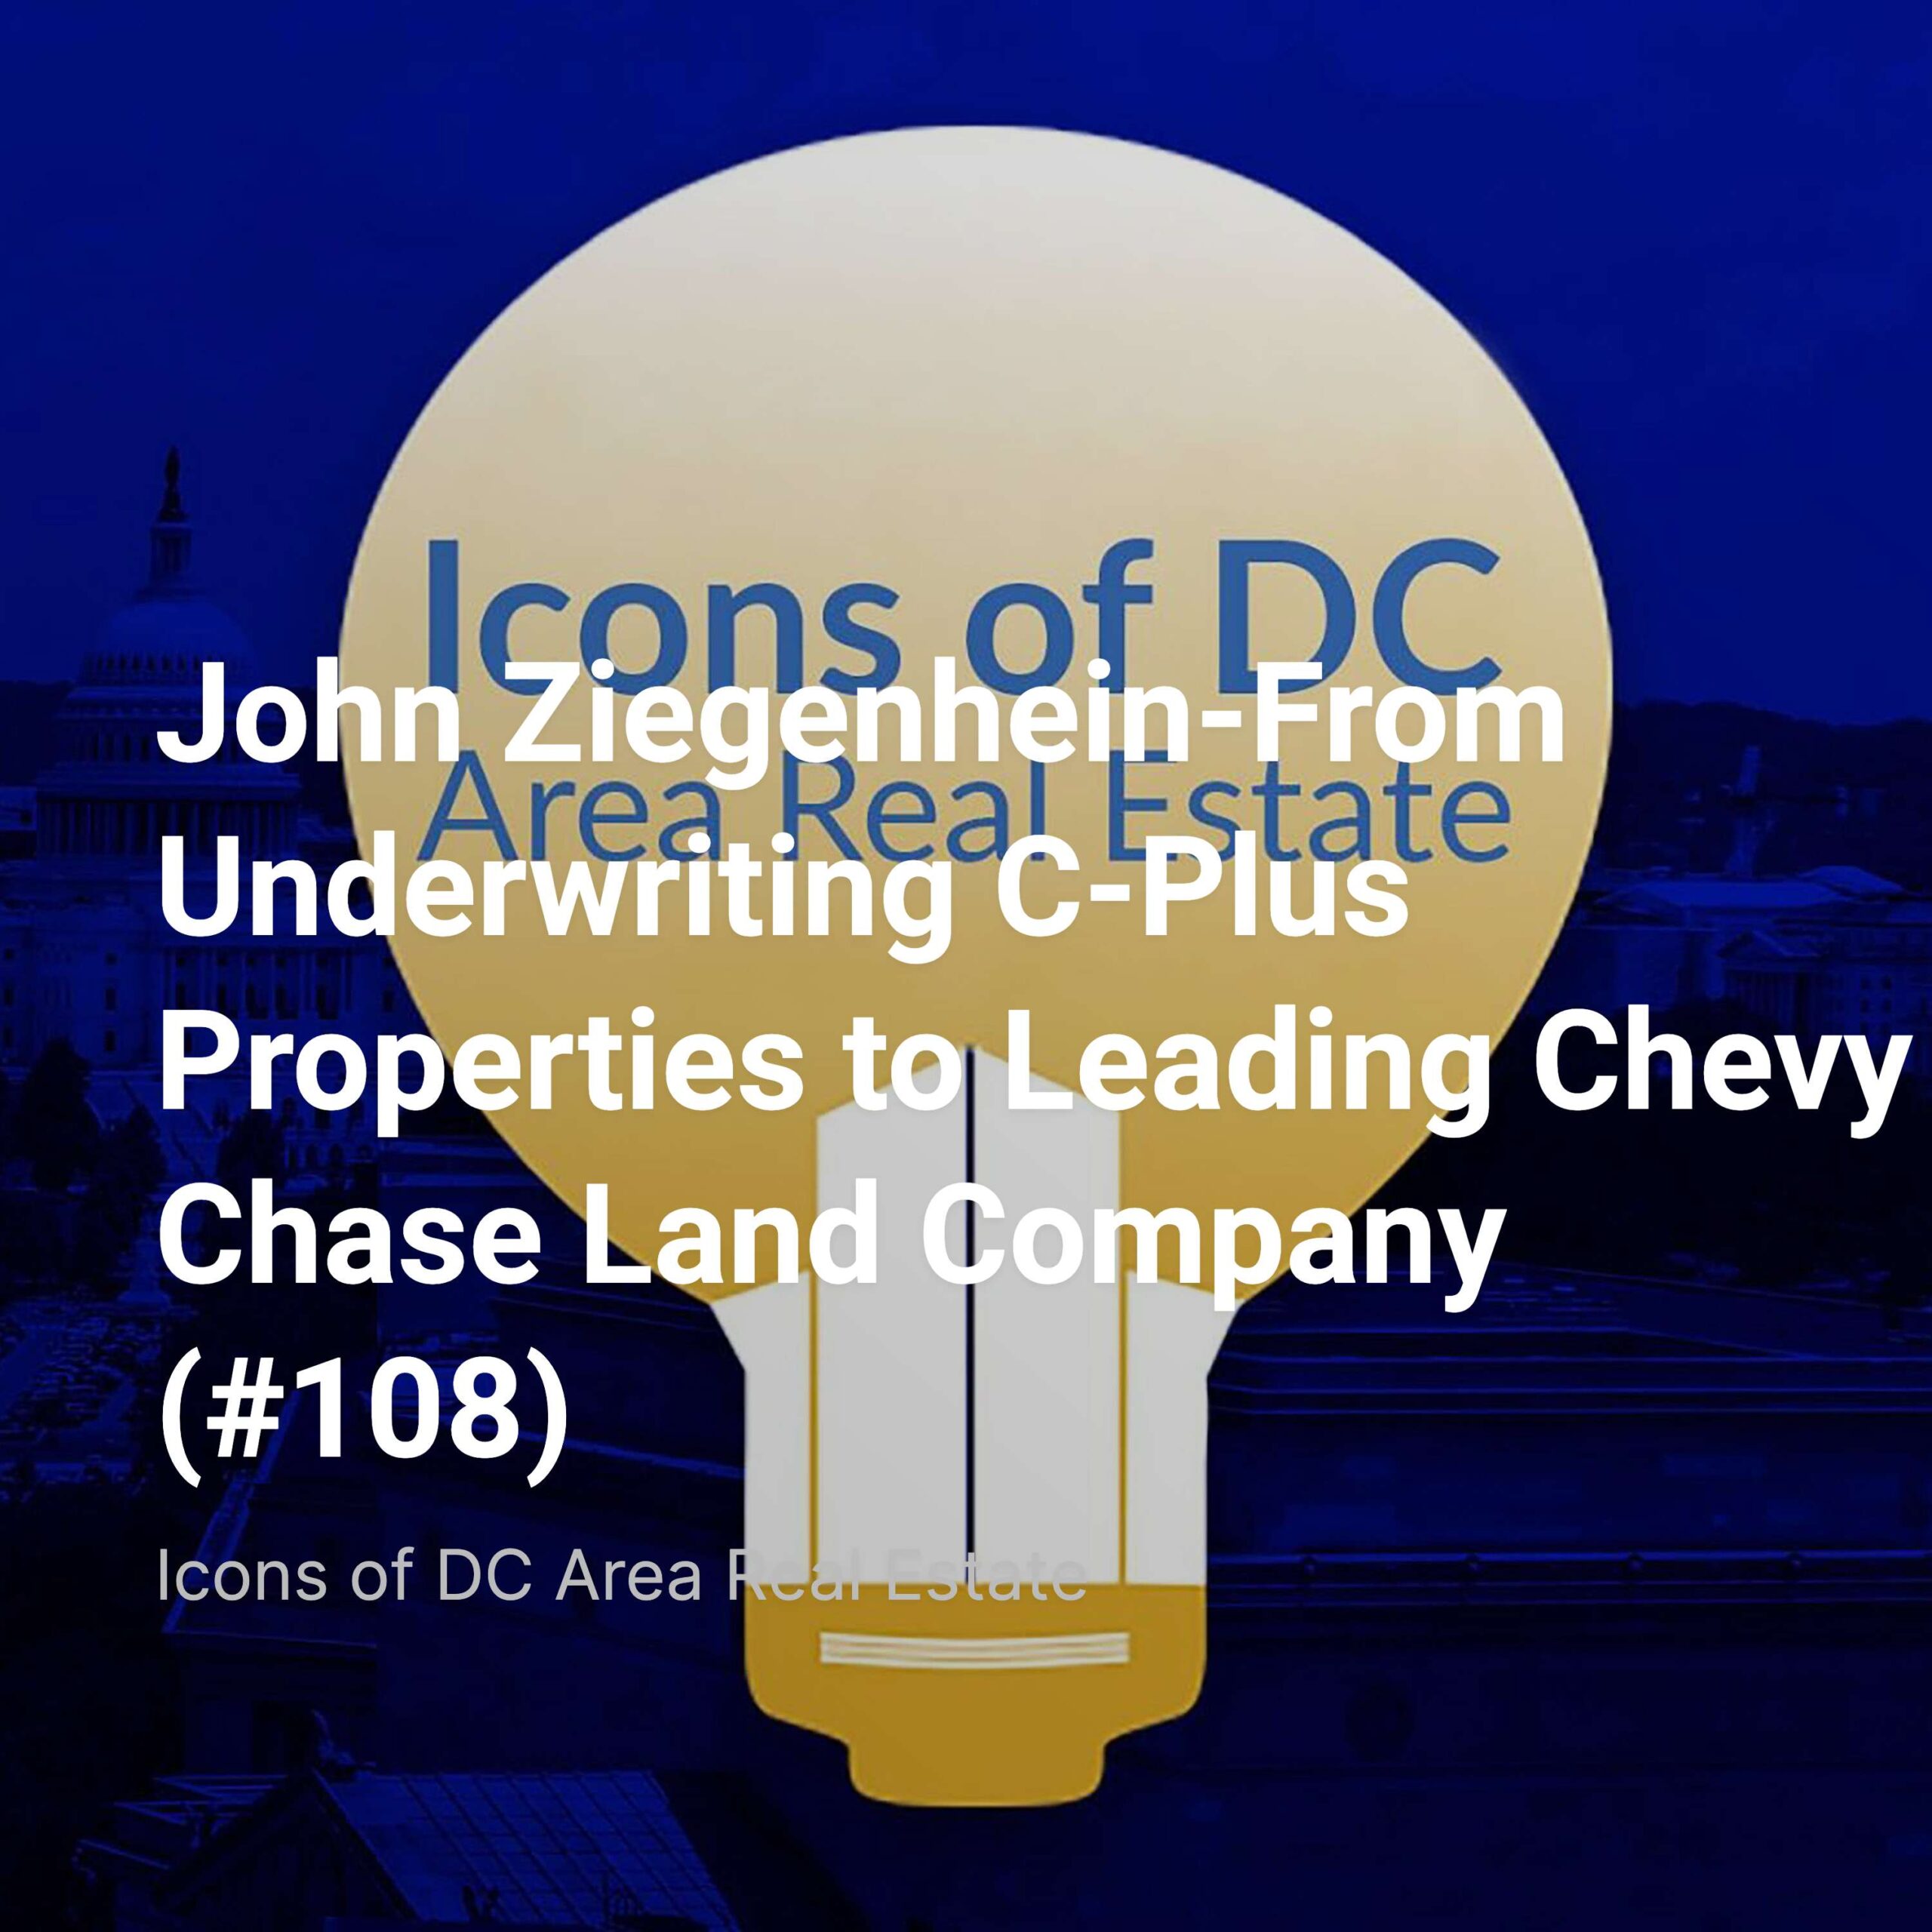 John Ziegenhein-From Underwriting C-Plus Properties to Leading Chevy Chase Land Company (#108)